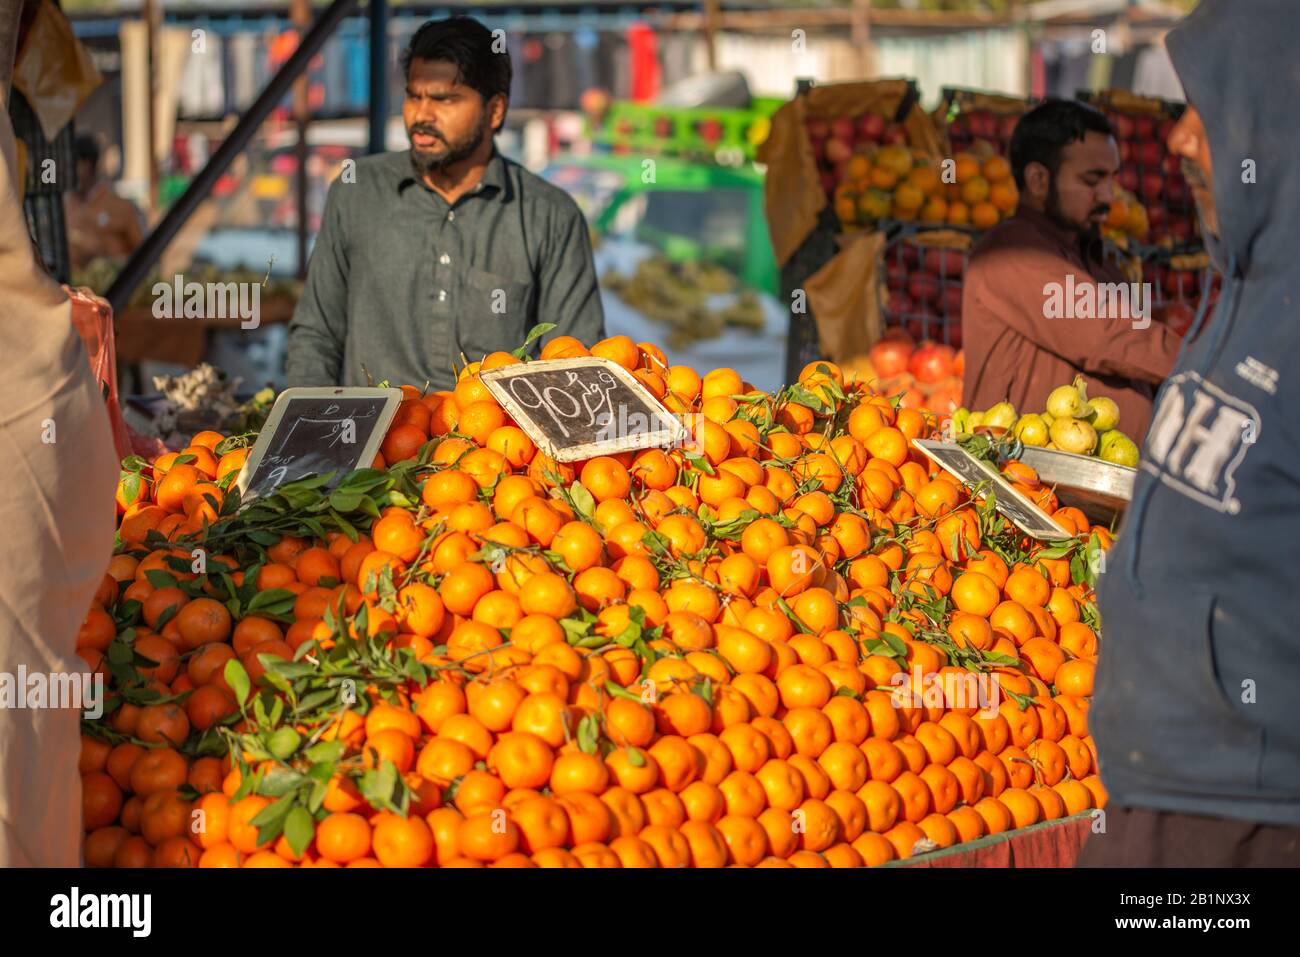 Islamabad, Islamabad Capital Territory, Pakistan - February 3, 2020, A seller is waiting for customers in the vegetable market to sell orange fruits. Stock Photo